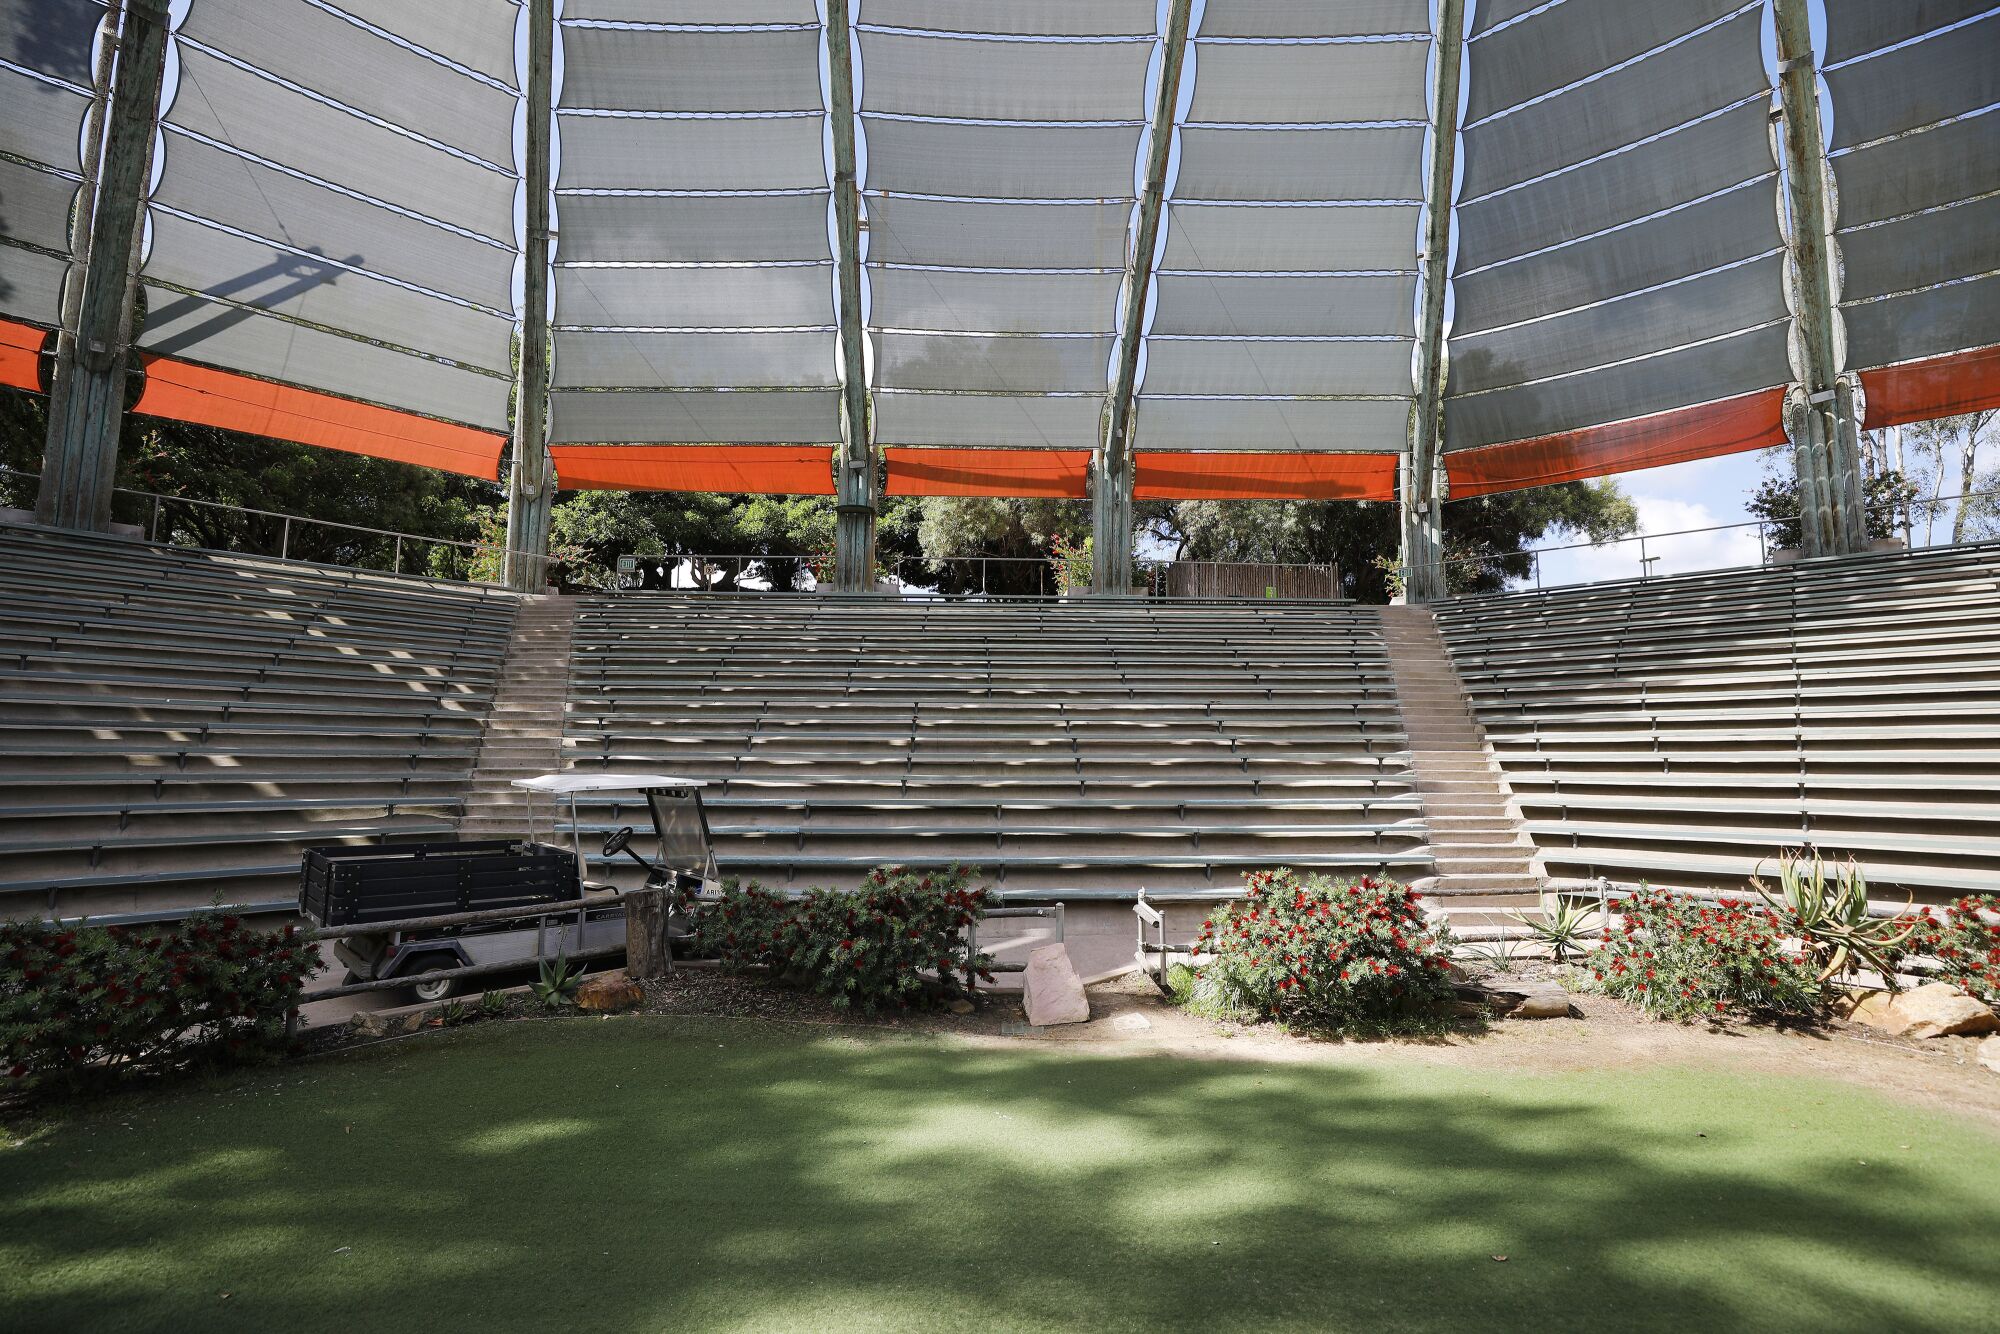 Benbough Amphitheater, which hosts the Frequent Flyers Bird Show, sits empty on May 19, 2020, at the San Diego Zoo Safari Park.